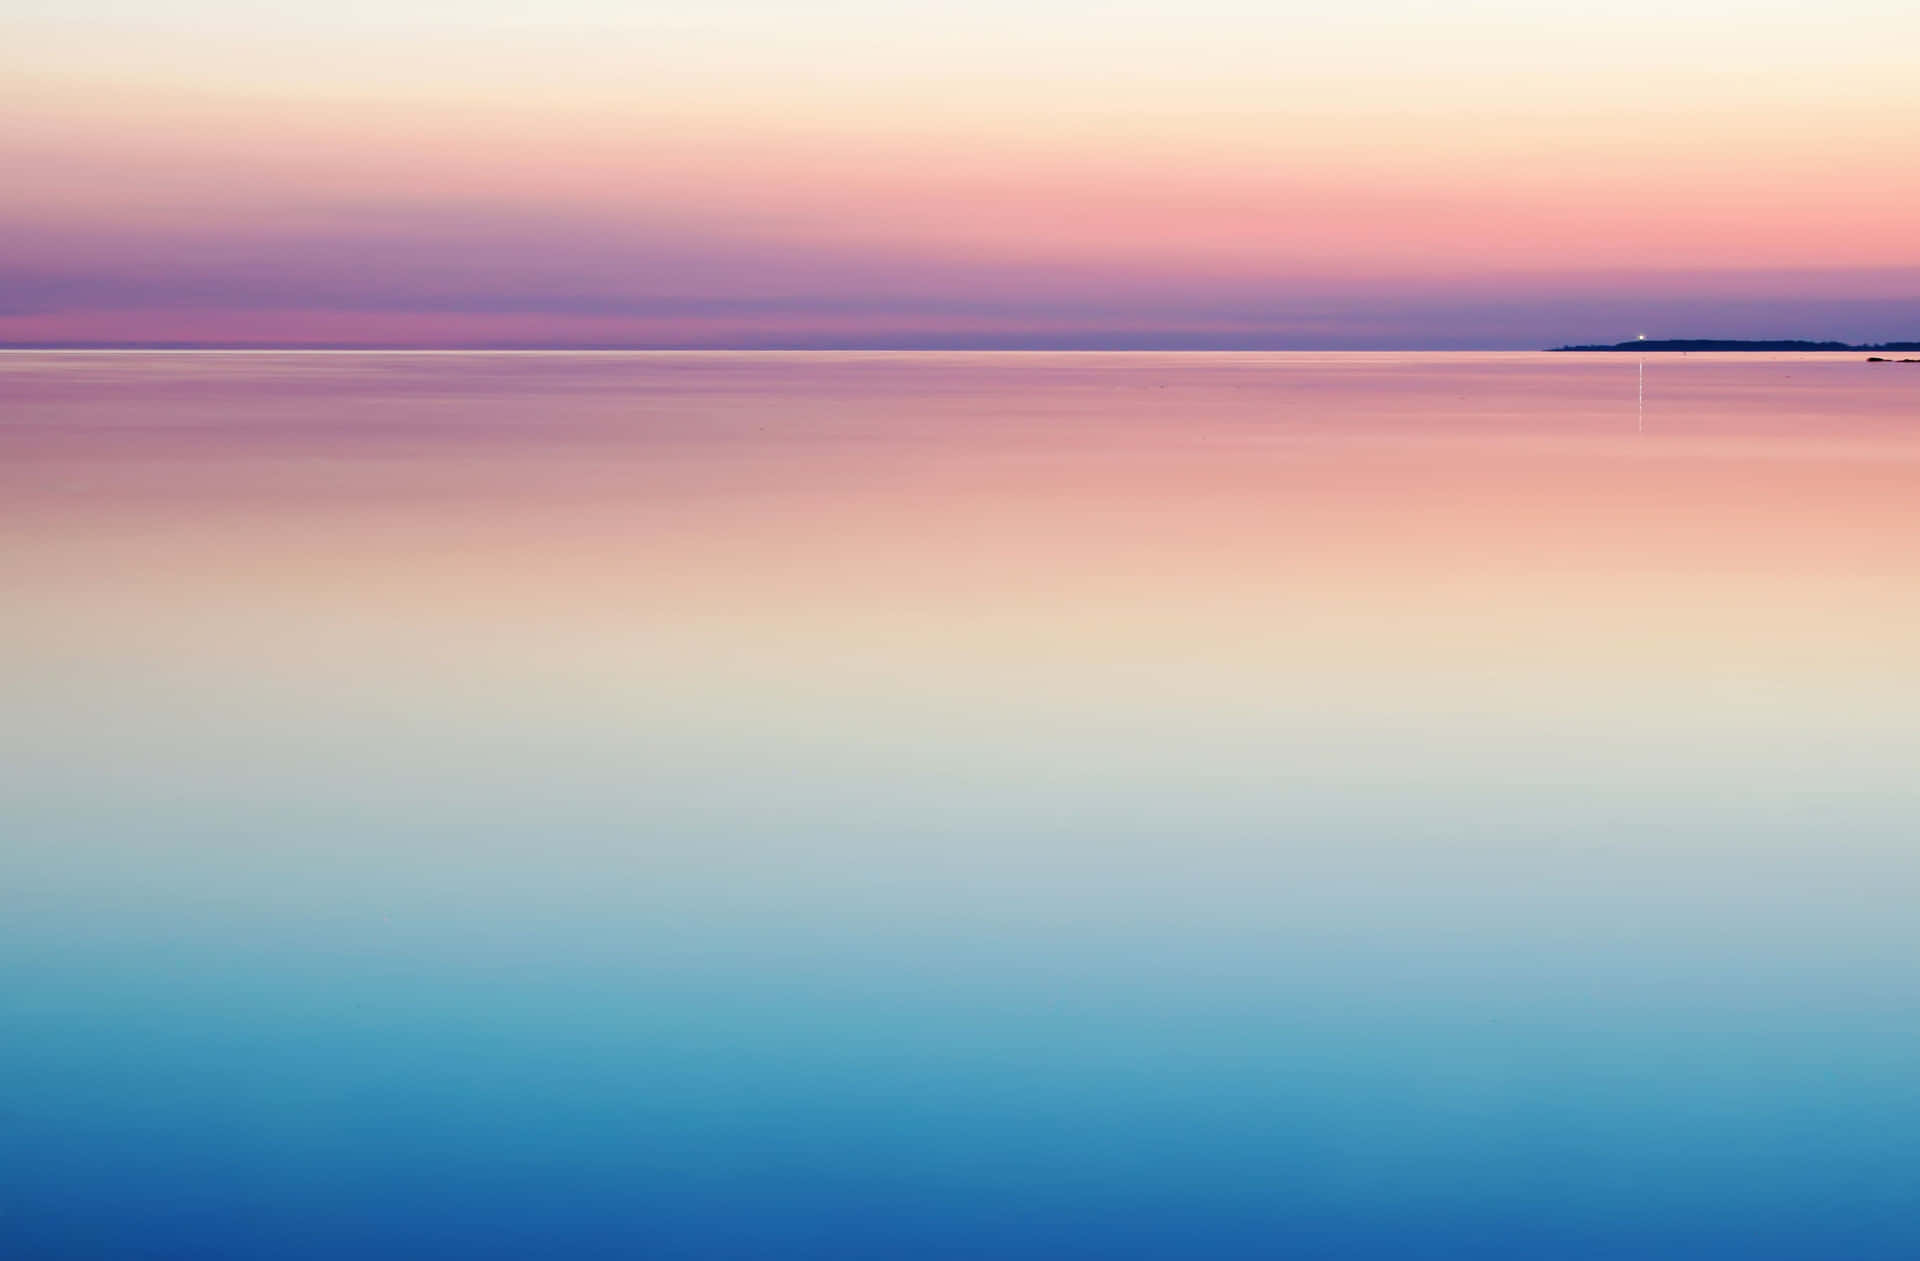 A Sunset Over A Calm Body Of Water